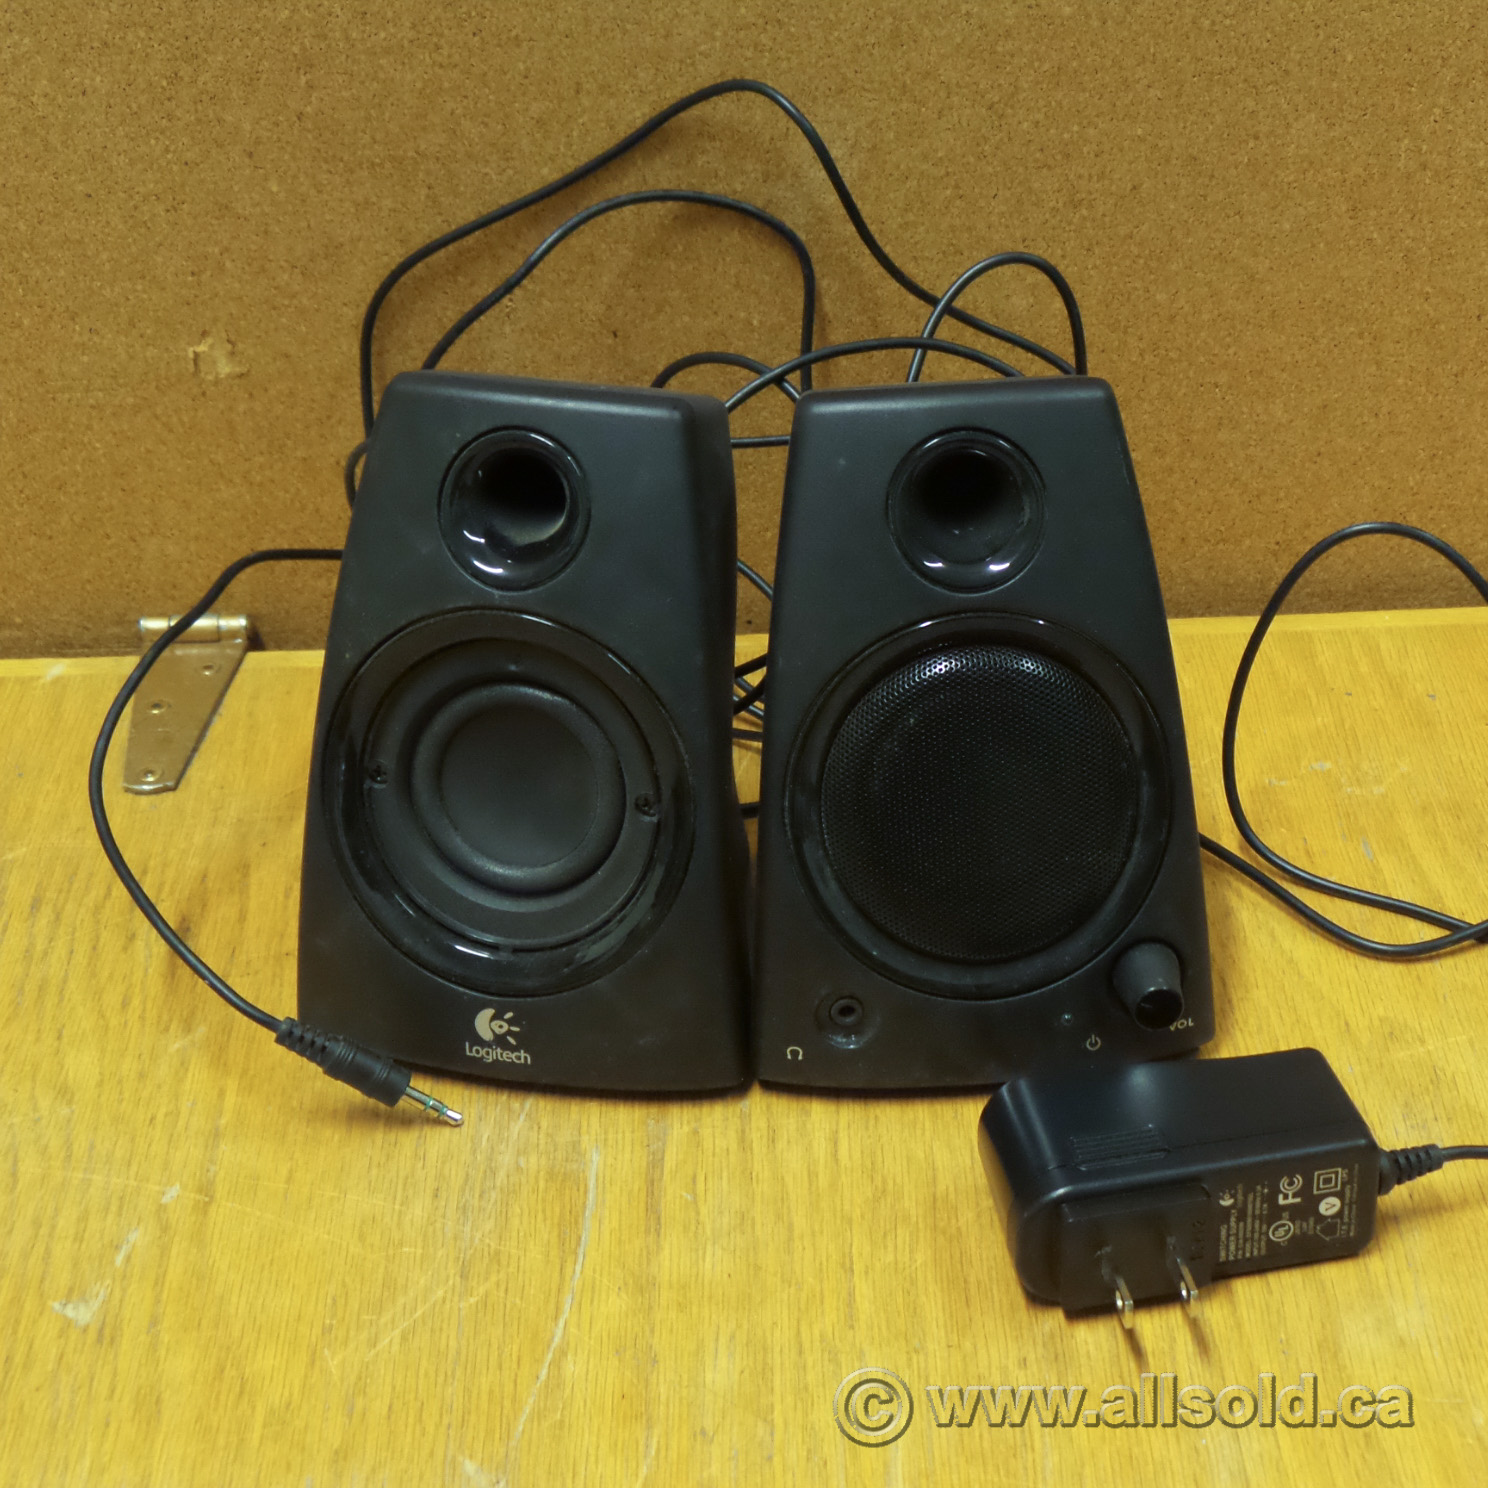 Logitech Z130 Computer Speakers - Allsold.ca - Buy & Sell Used Office  Furniture Calgary